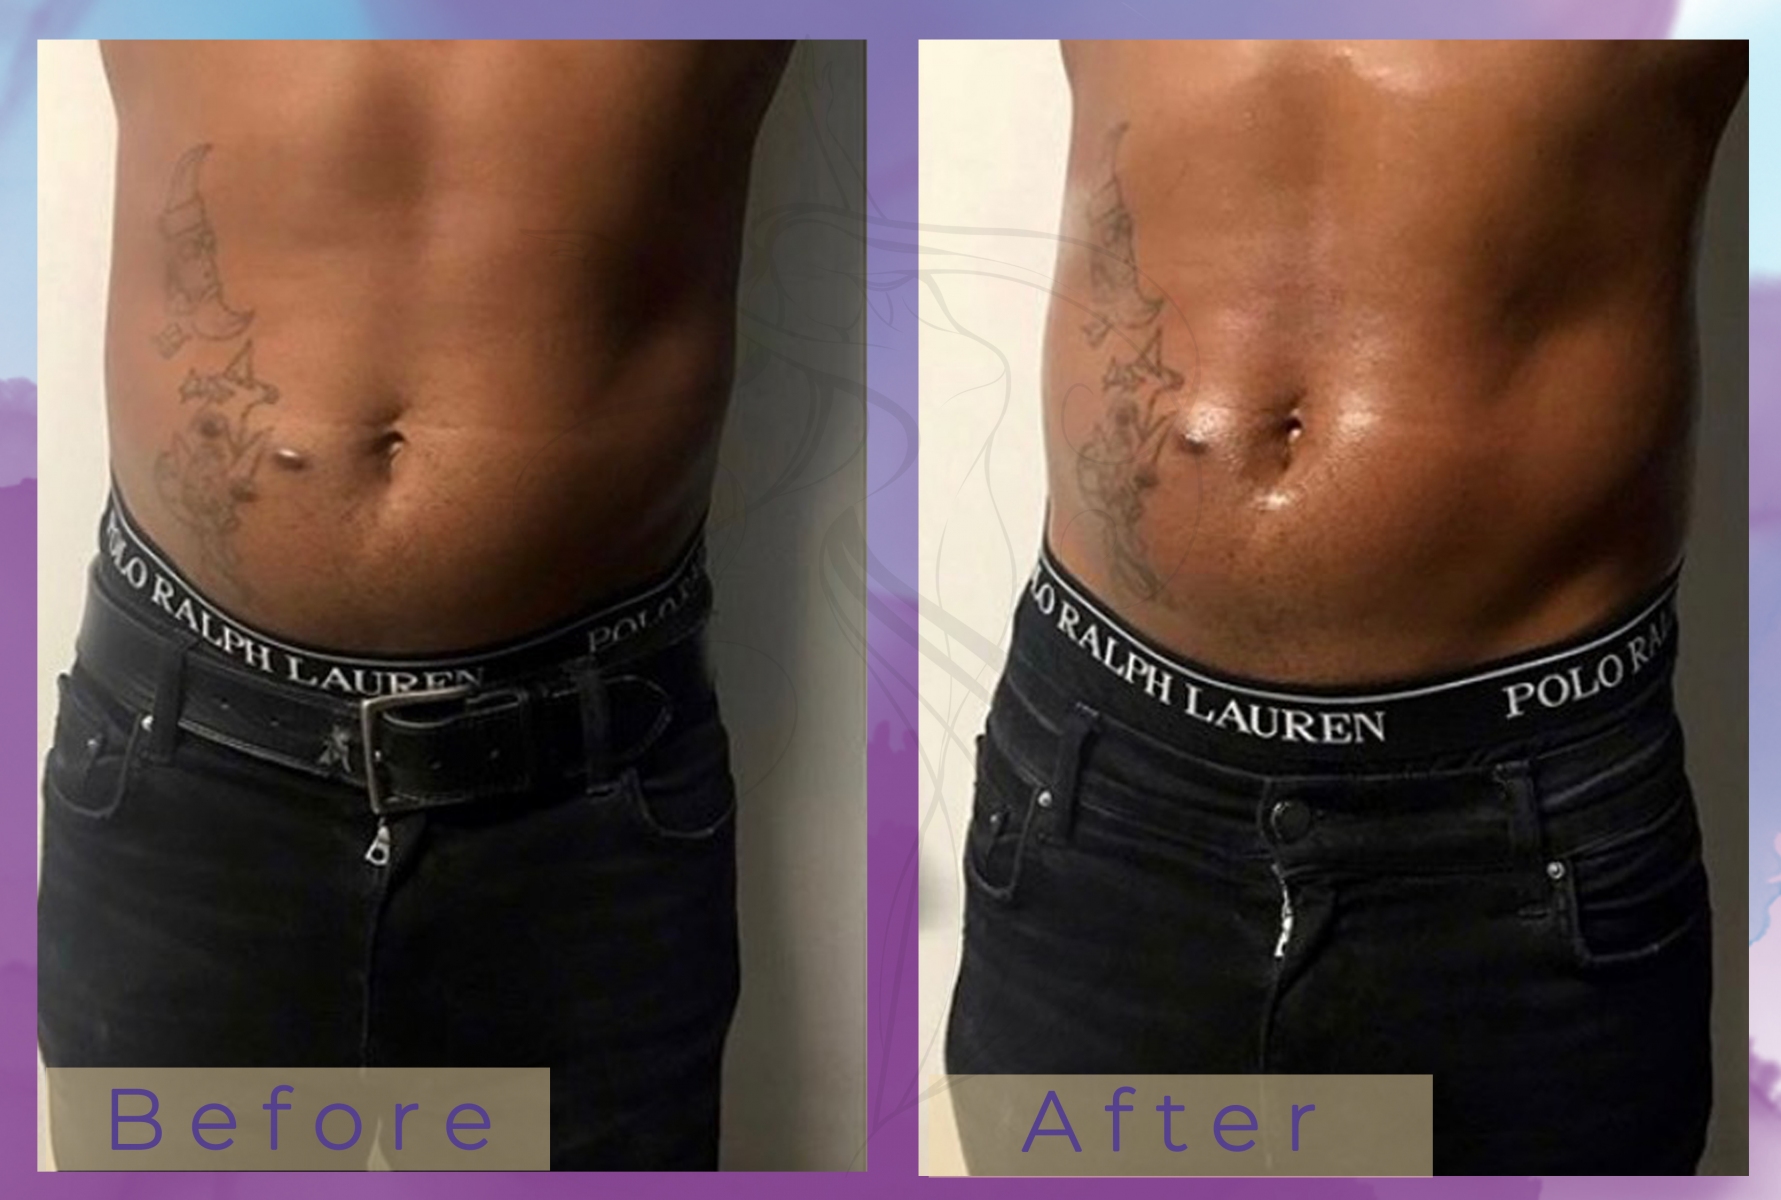 Client Results